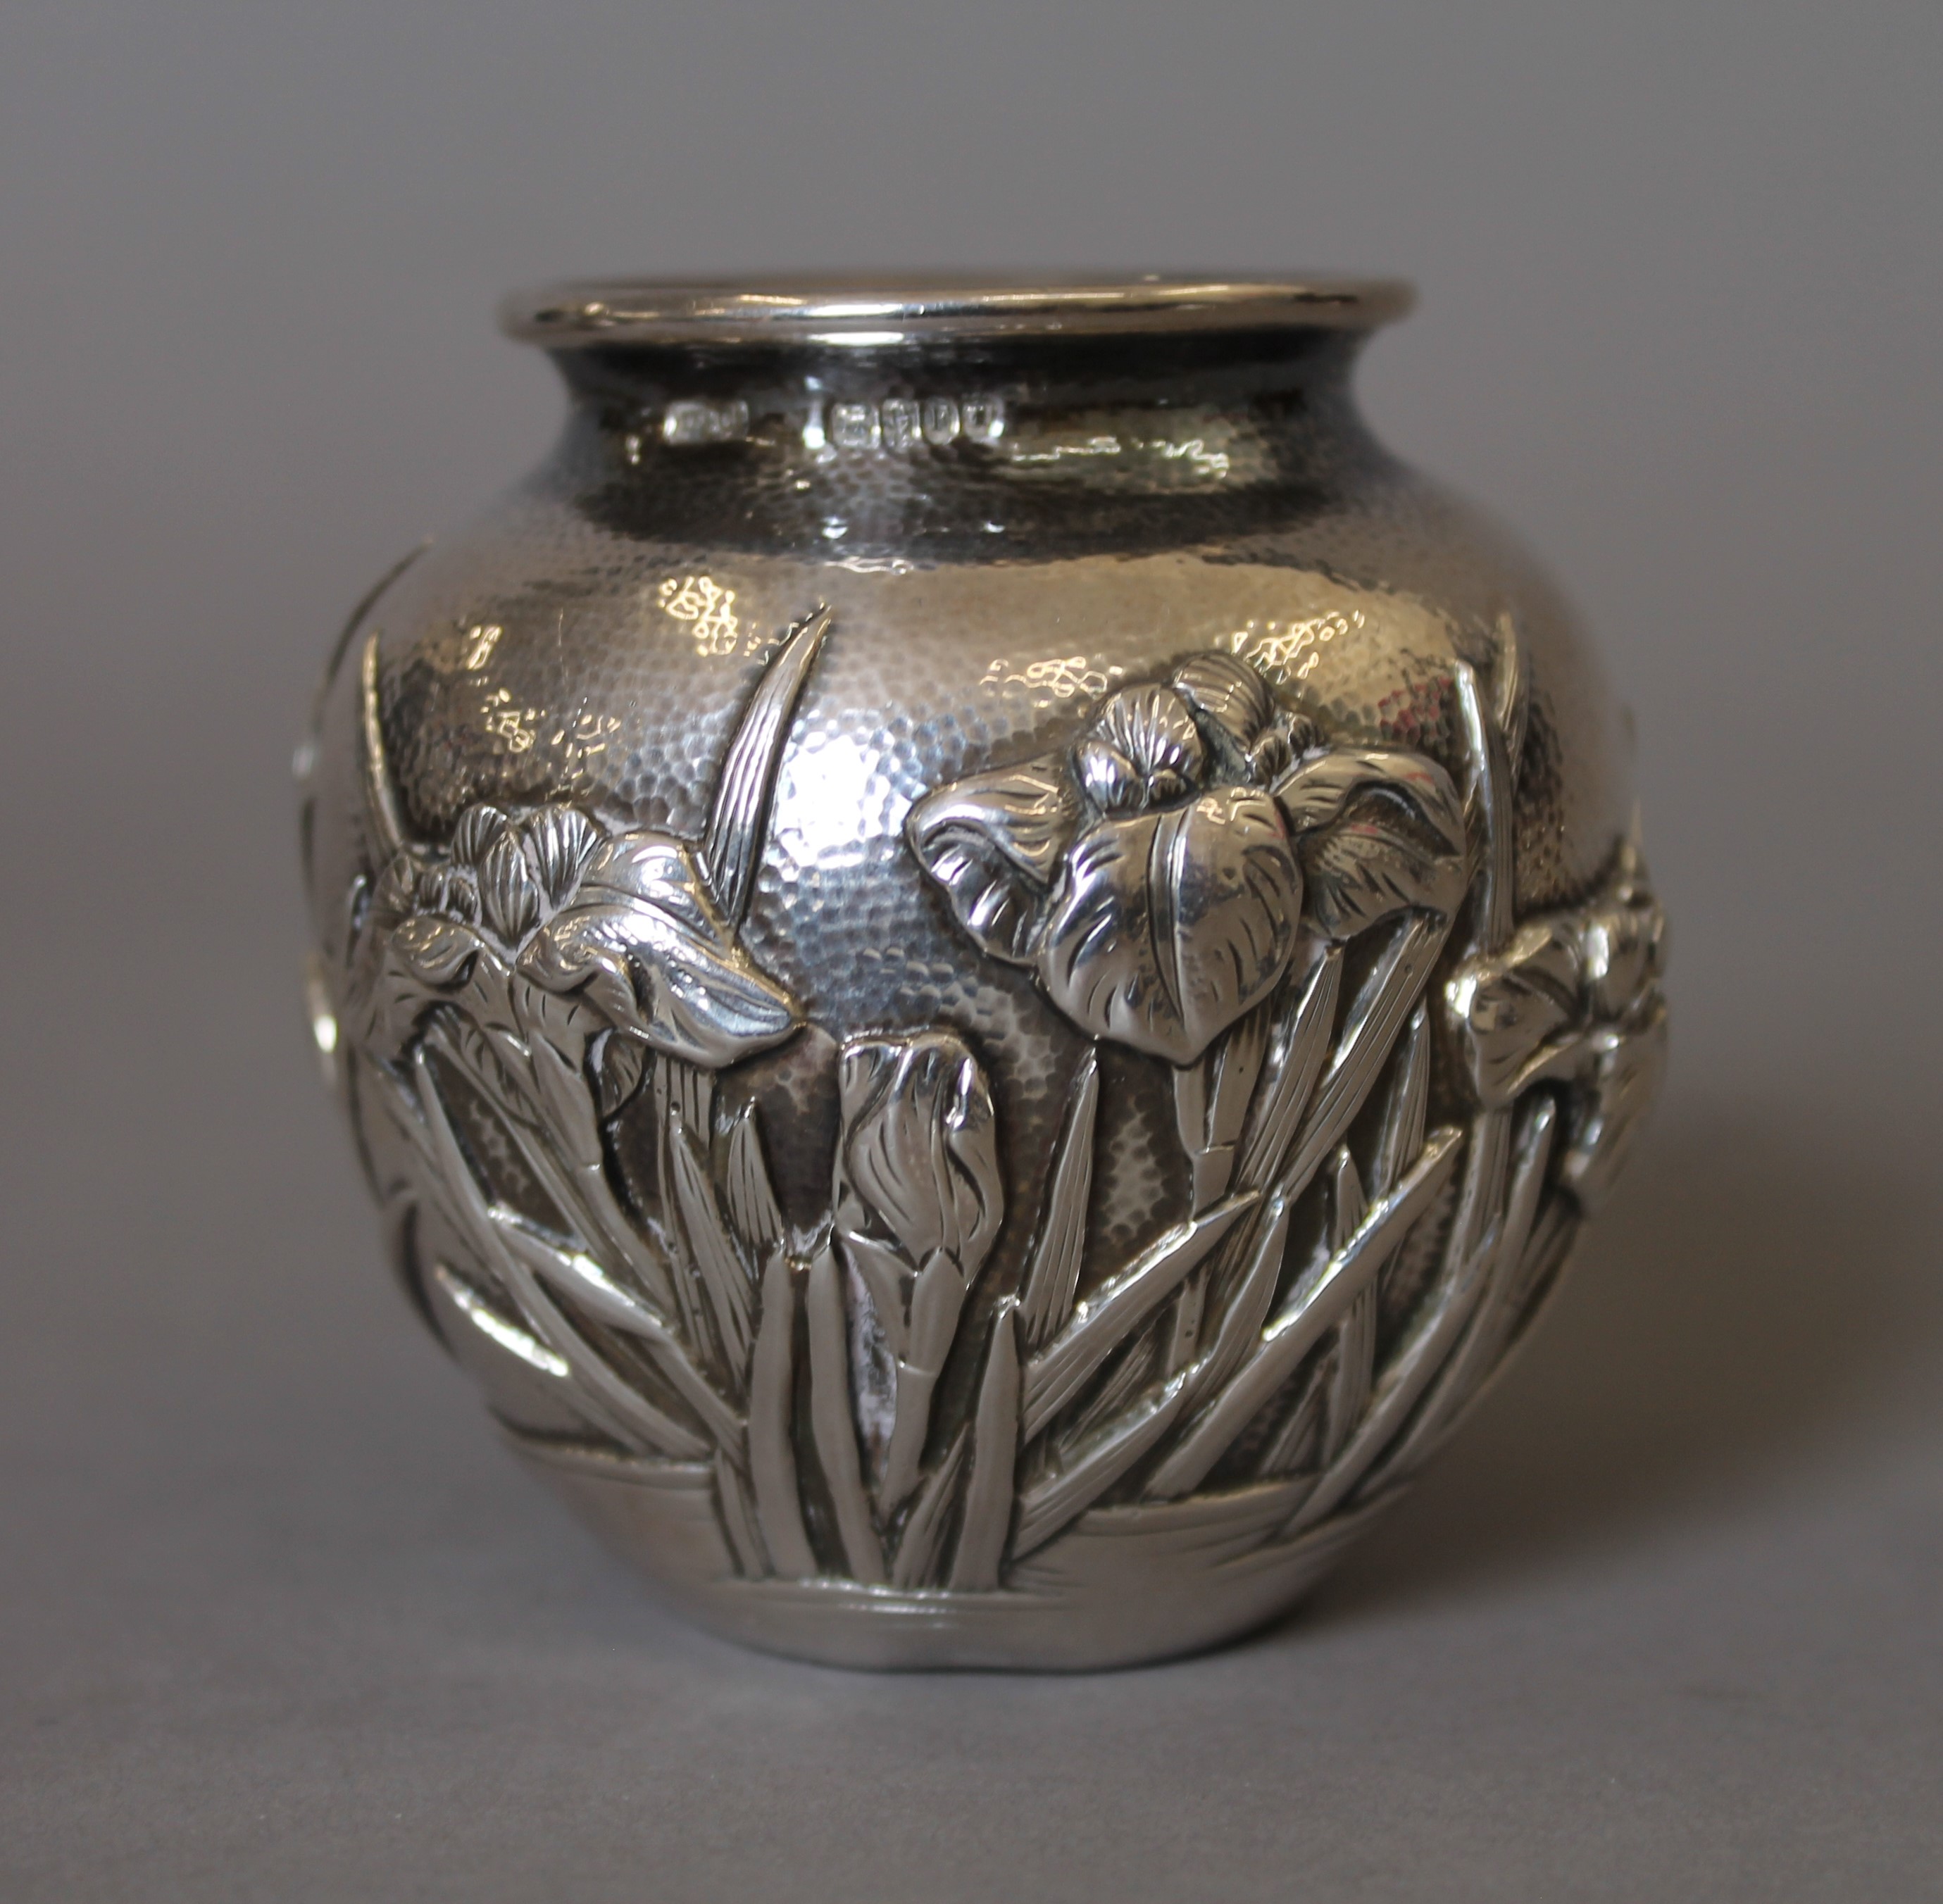 A pair of Japanese embossed silver vases, with Liberty & Co import marks. Each 6.5 cm high. 247. - Image 3 of 5